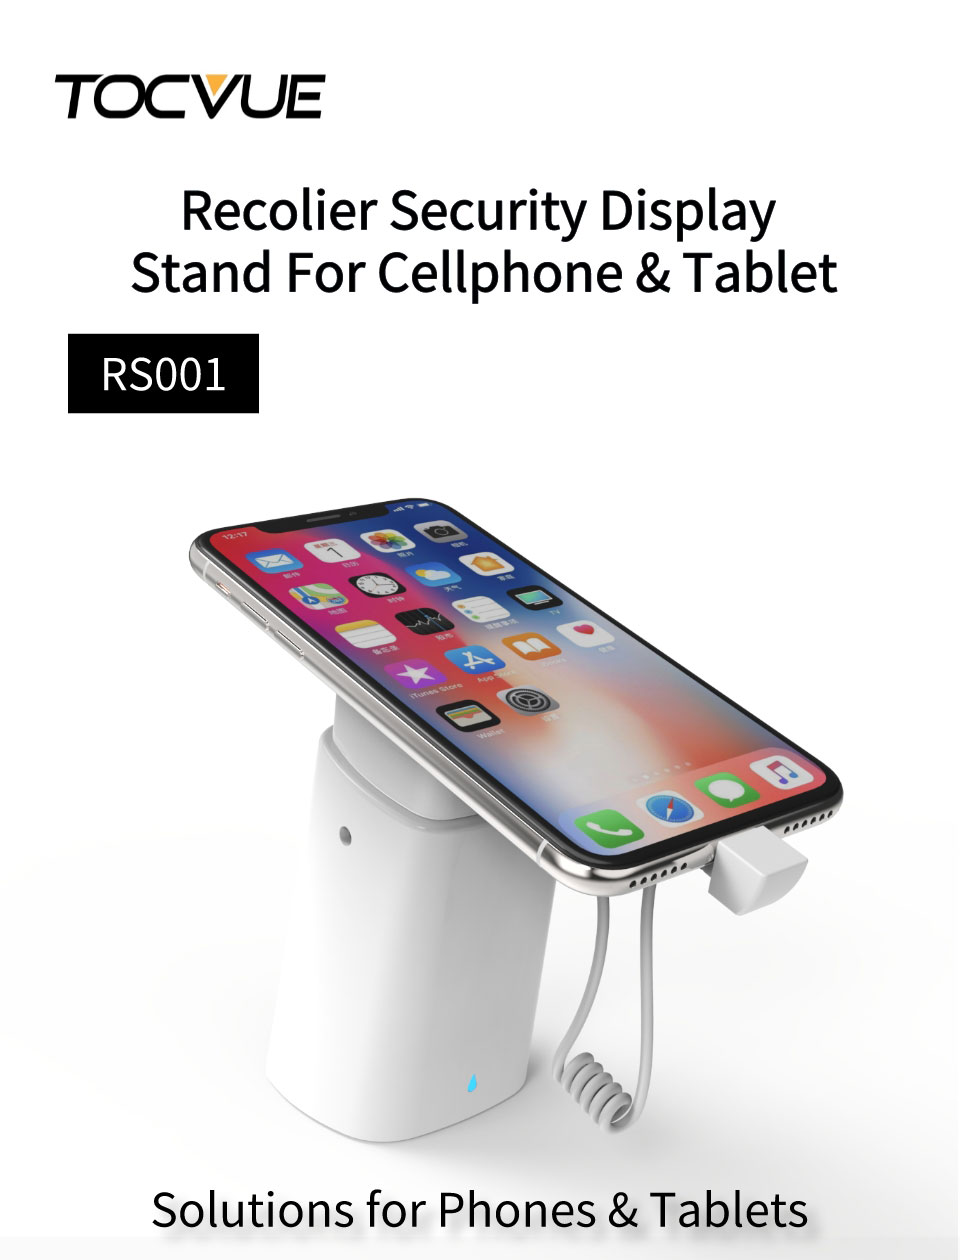 RS001 01 RS001-2 ULTRA HIGH SECURITY RECOLIER PHONE SECURITY DISPLAY STAND